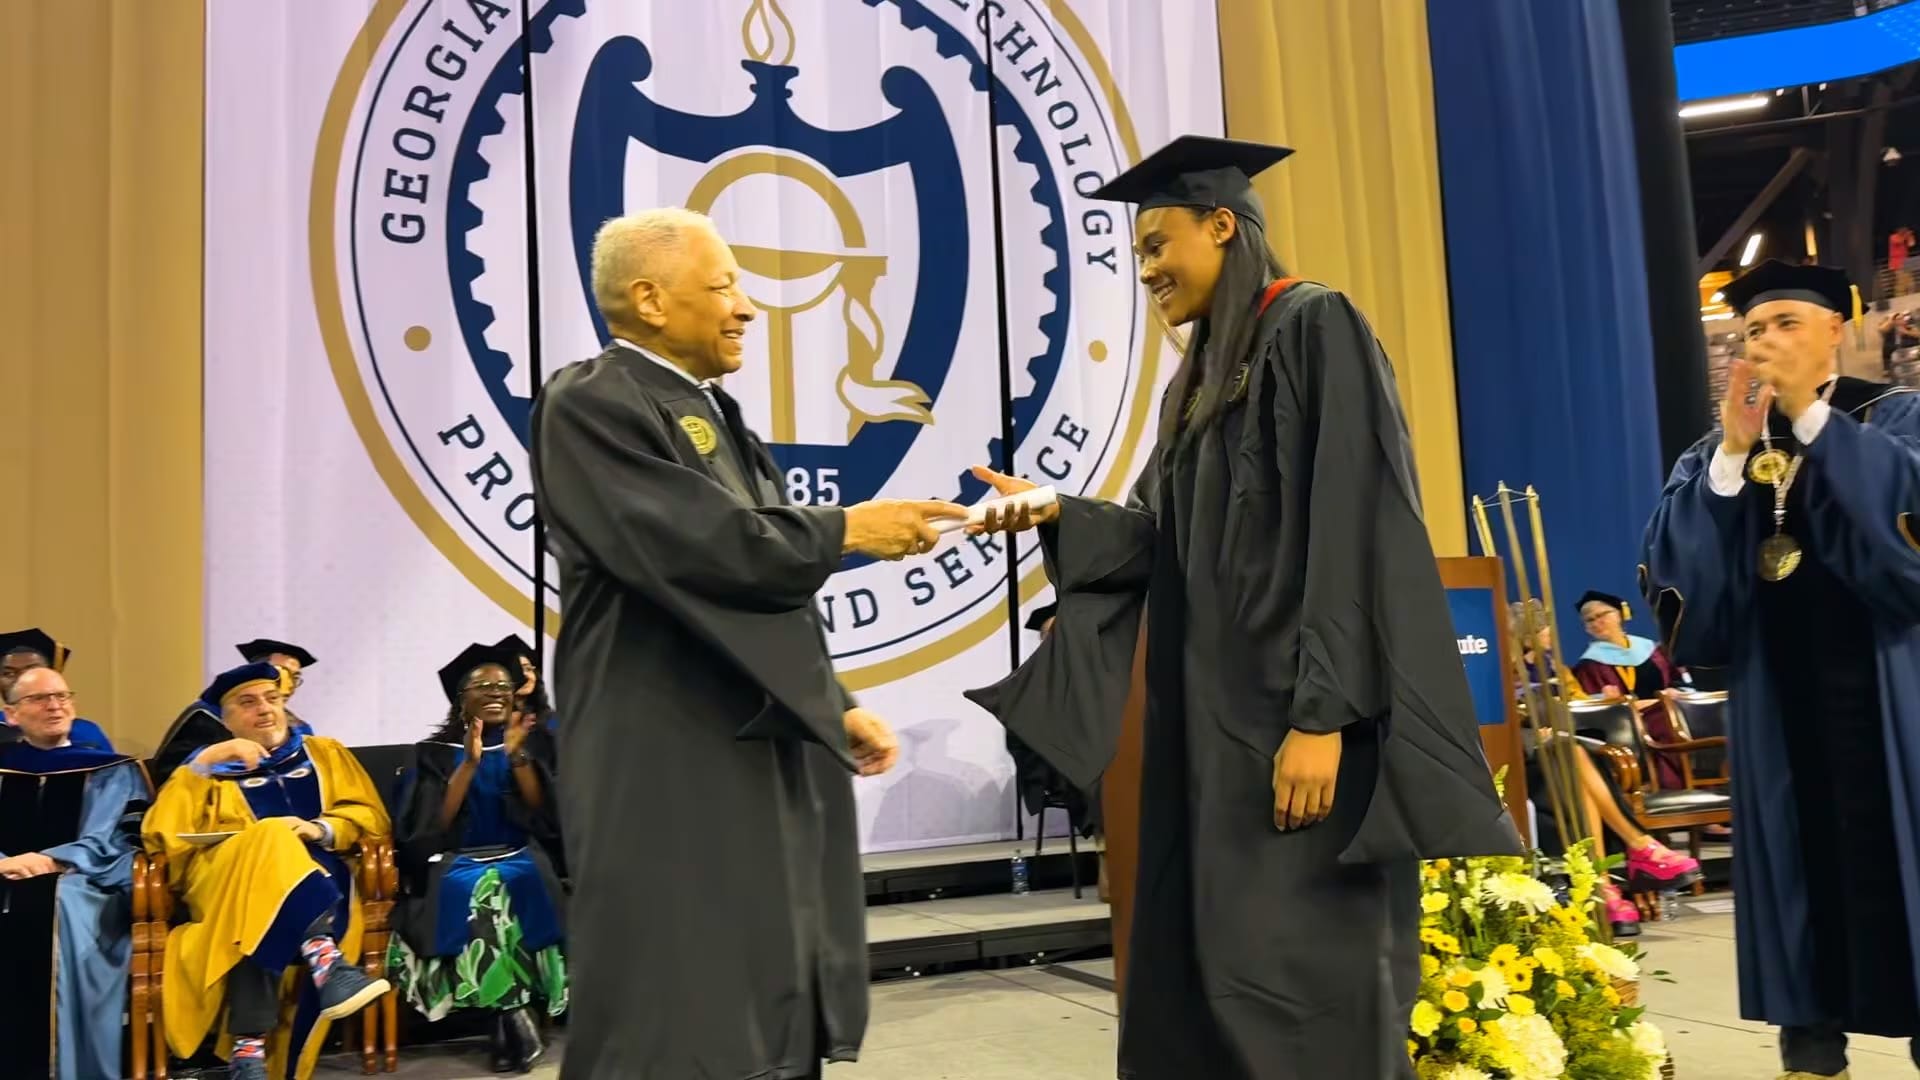 A Black Tech Legacy that can't be erased or hidden. Georgia Tech's First Black Graduate hands diploma to Granddaughter